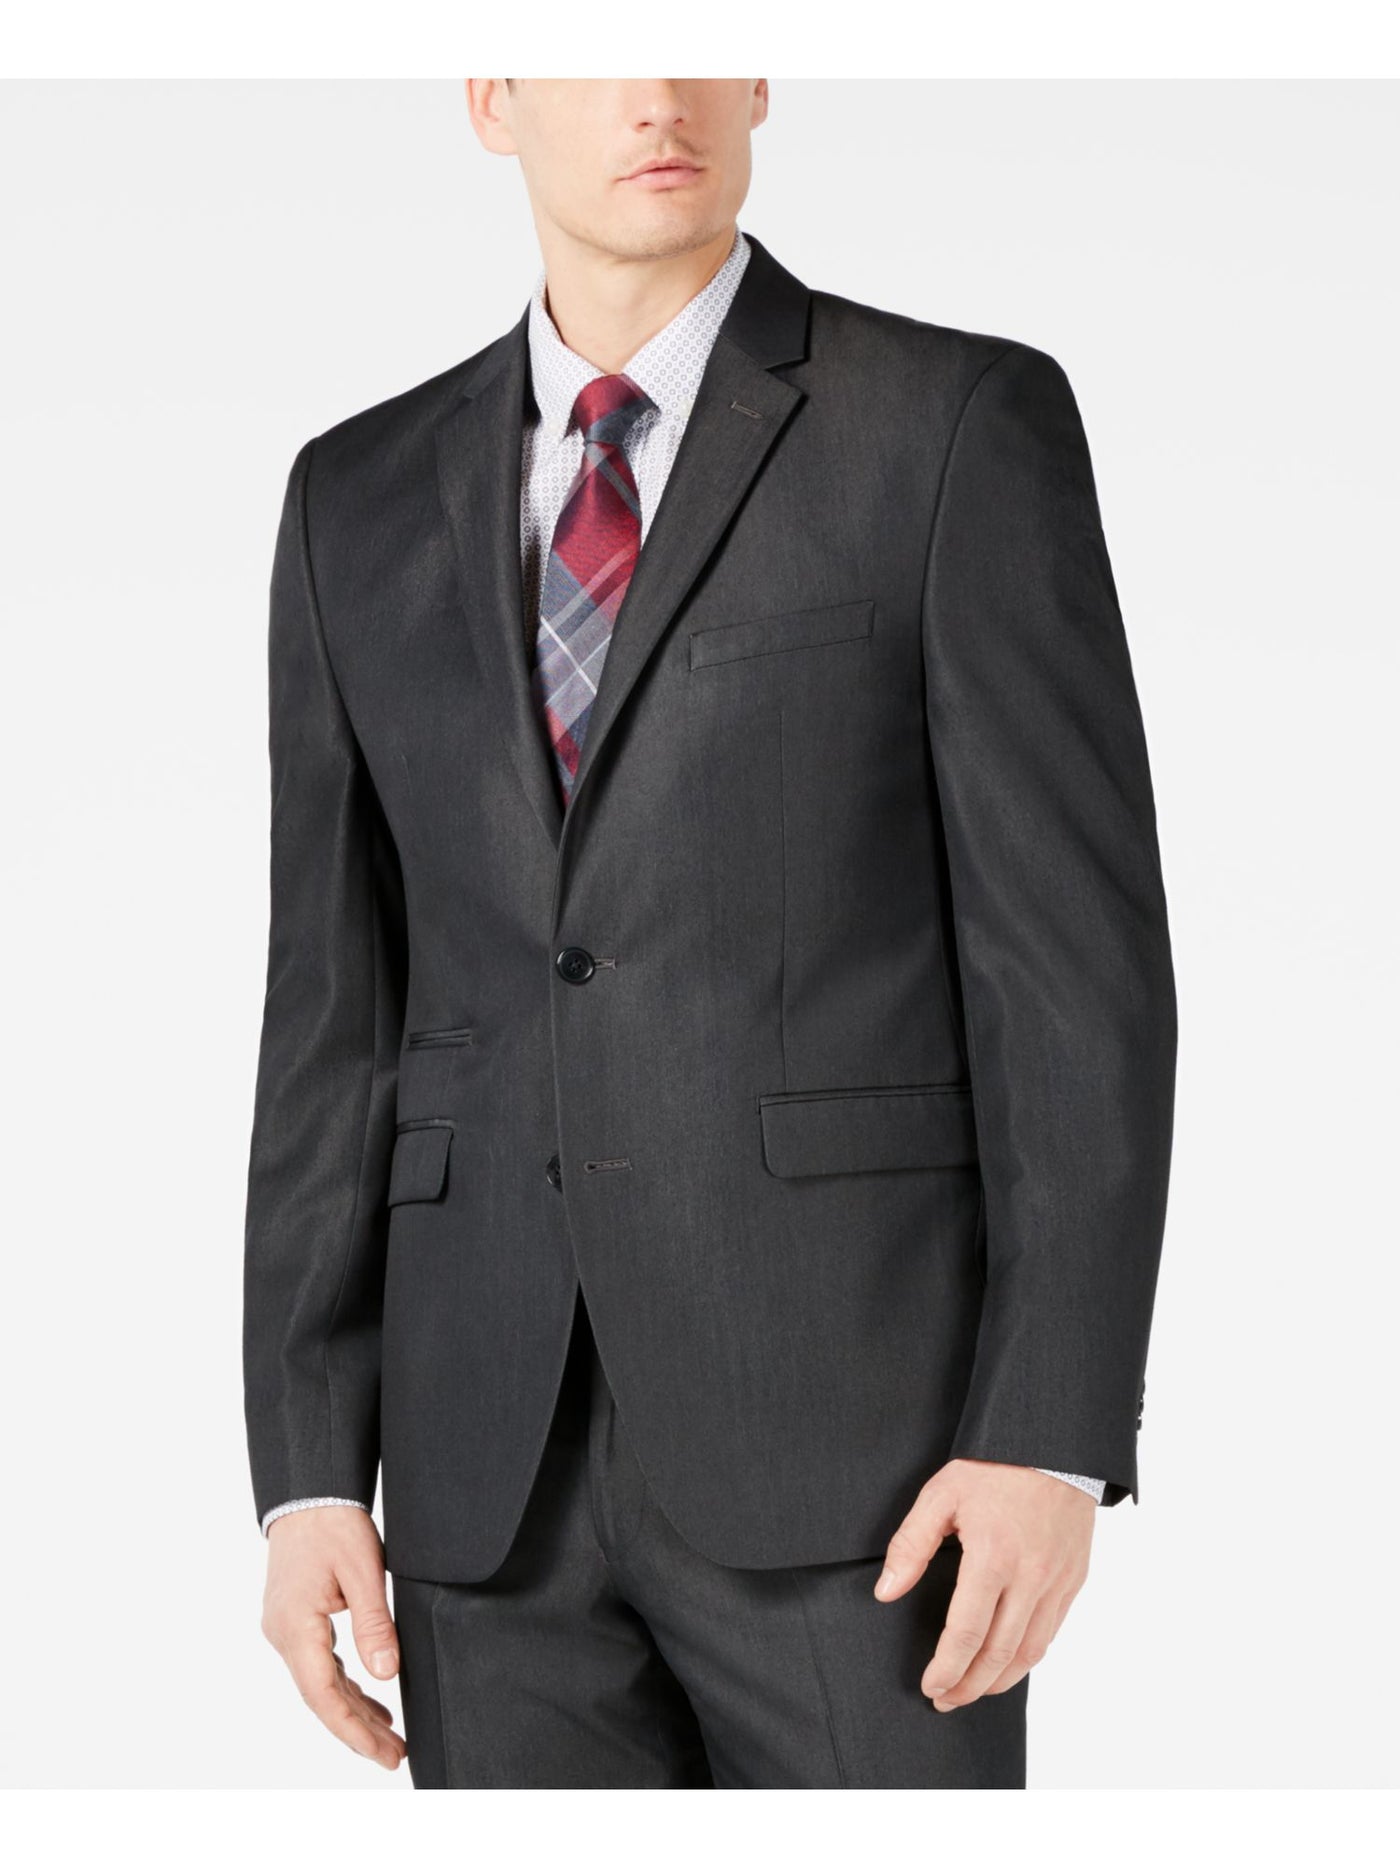 VINCE CAMUTO Mens Gray Single Breasted, Wrinkle Resistant Suit Jacket 42S